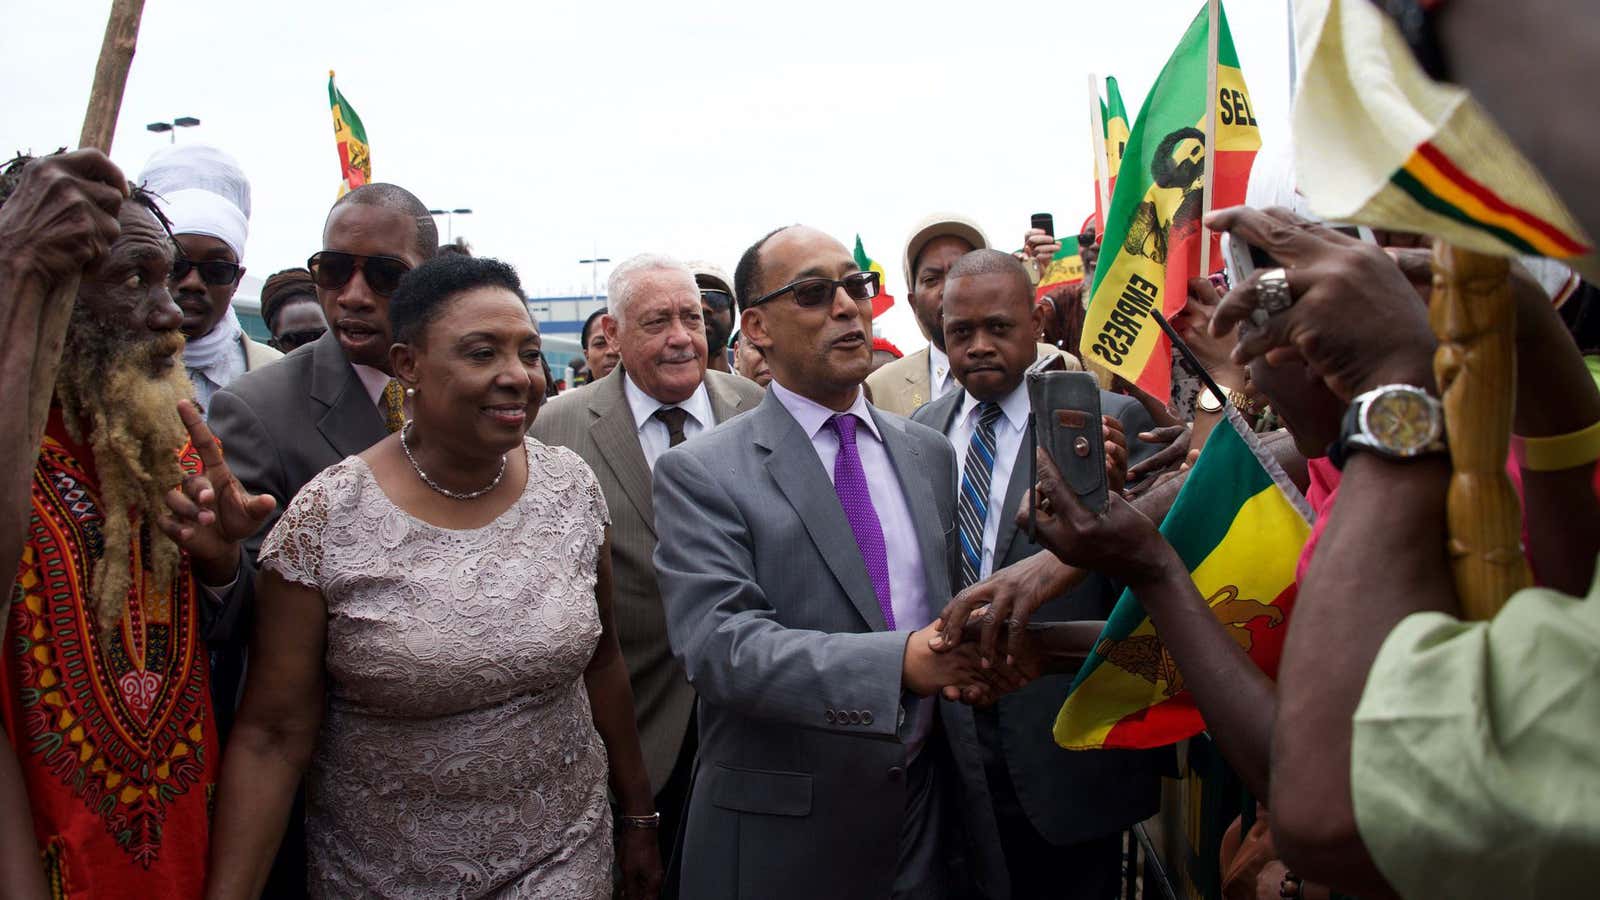 Prince Ermias Sahle Selassie, welcomed to Jamaica 50 years after his grandfather Emperor Haile Selassie.